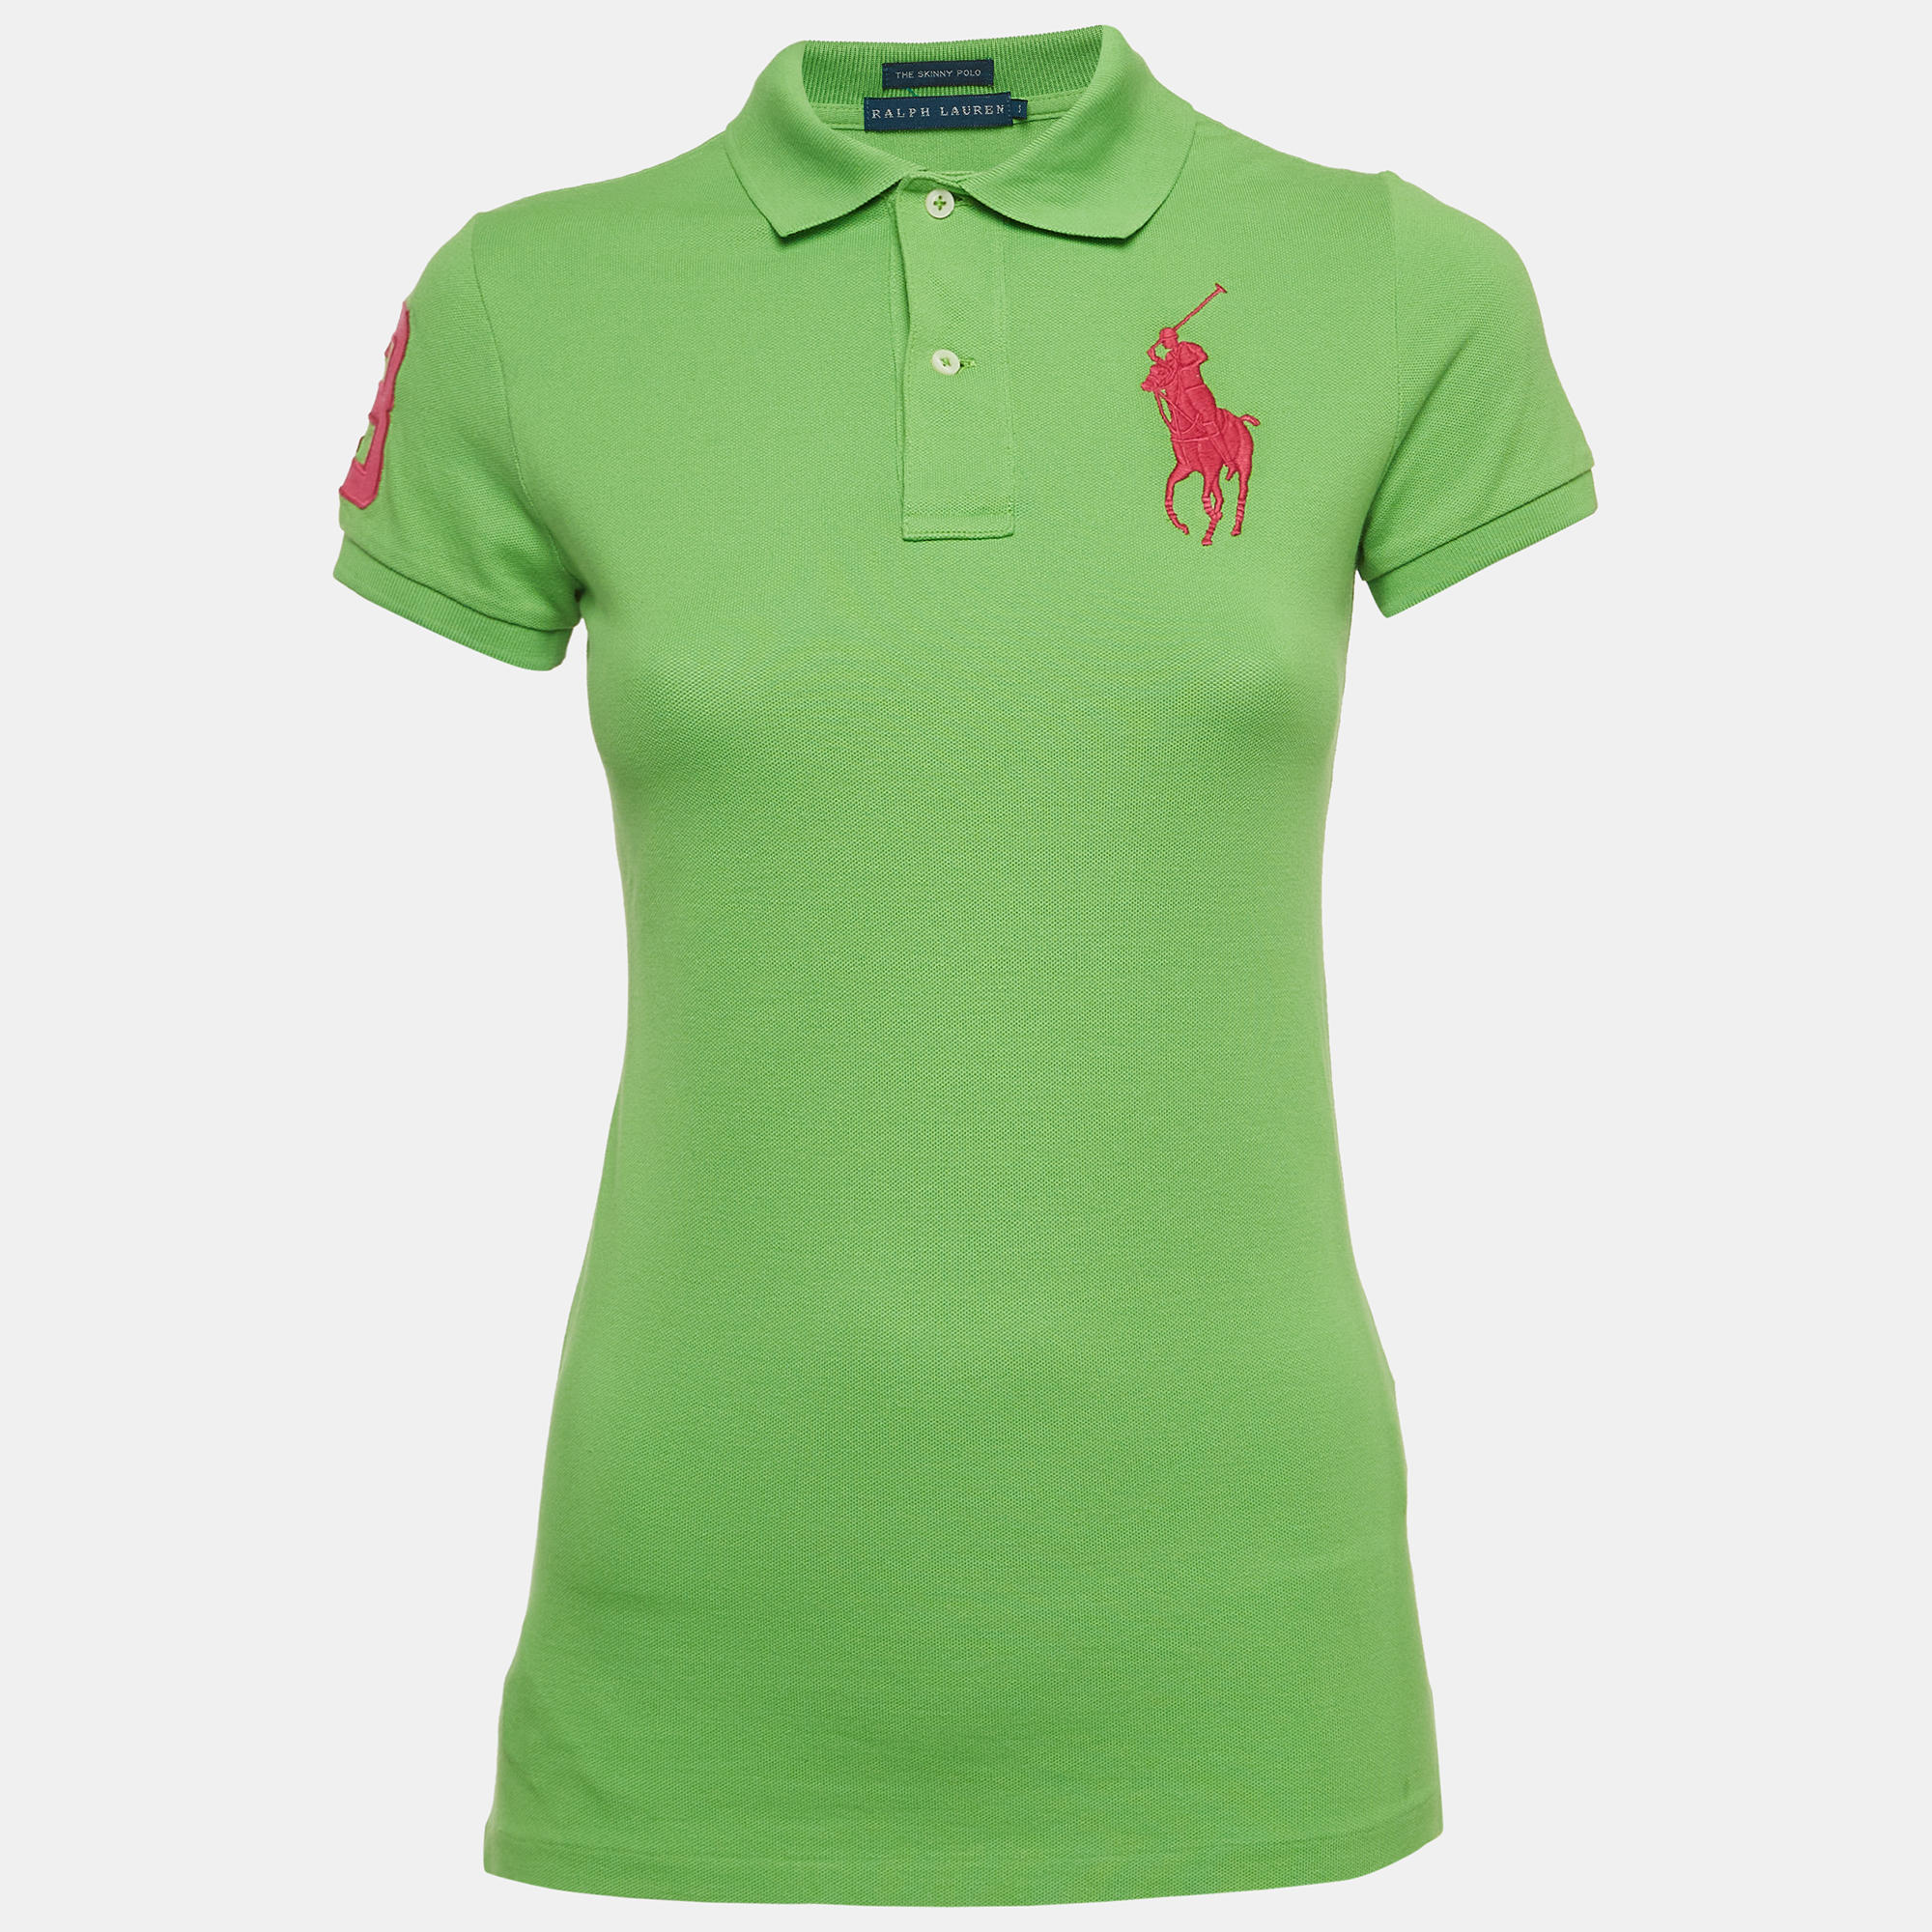 Ralph lauren green logo embroidered cotton the skinny polo s